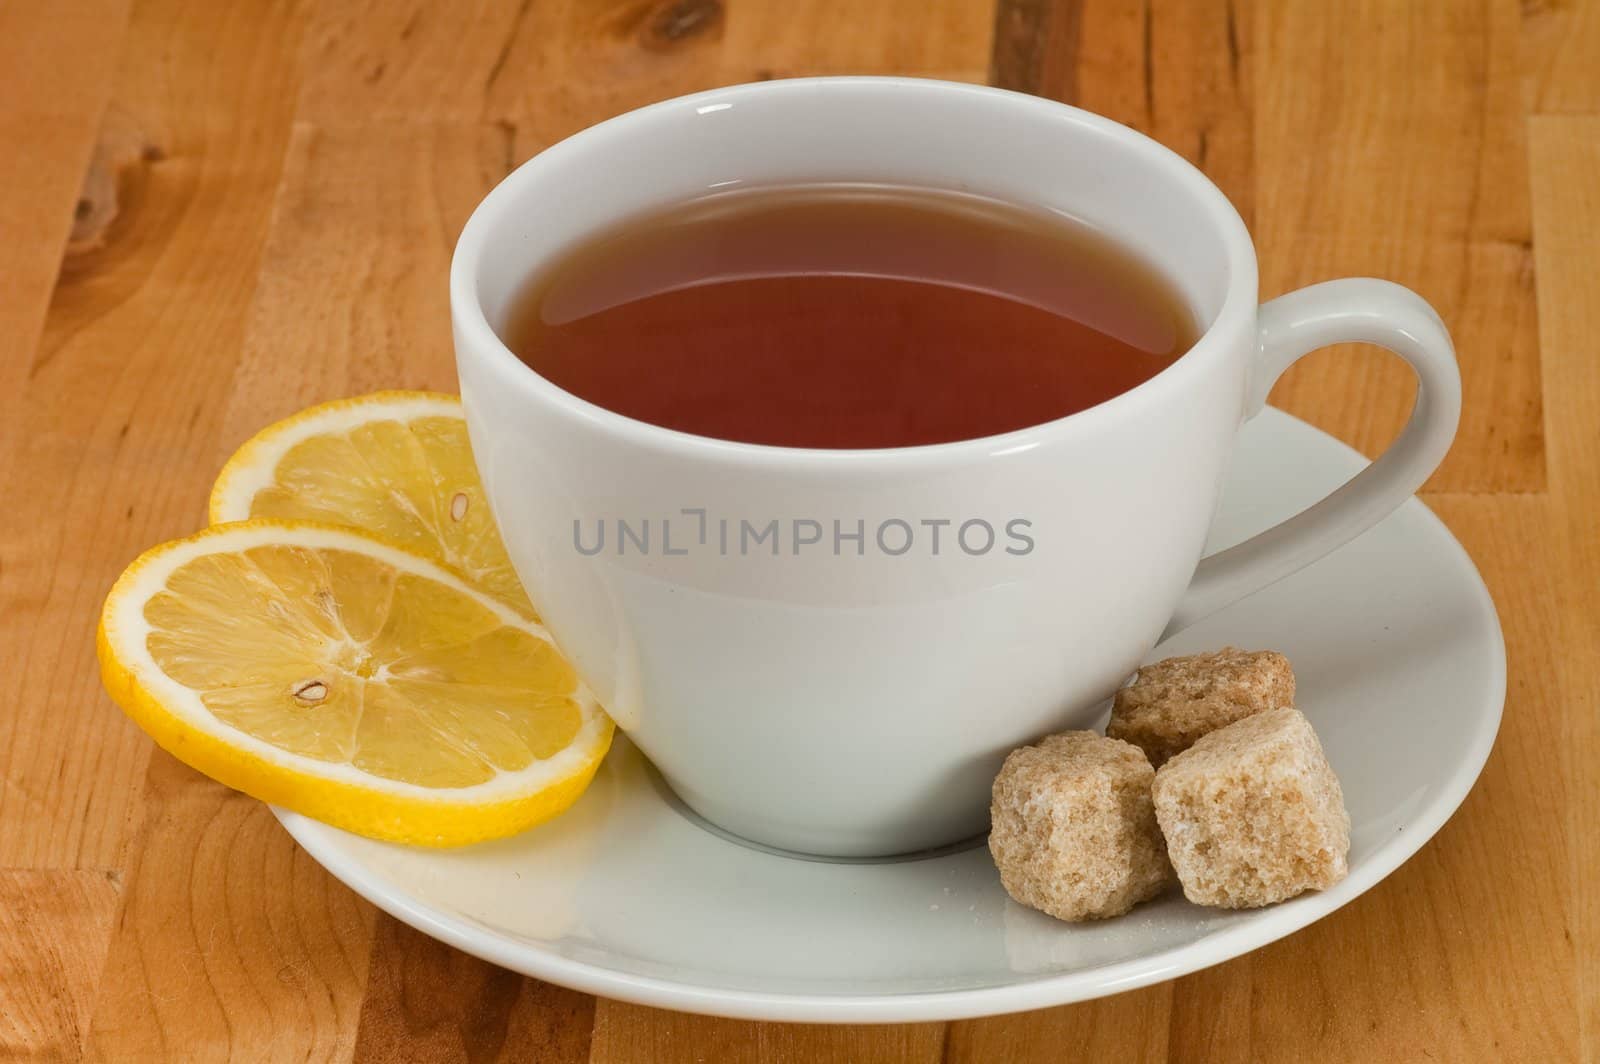 White porcelain cap of tea with sliced lemon and brown sugar on the wooden table